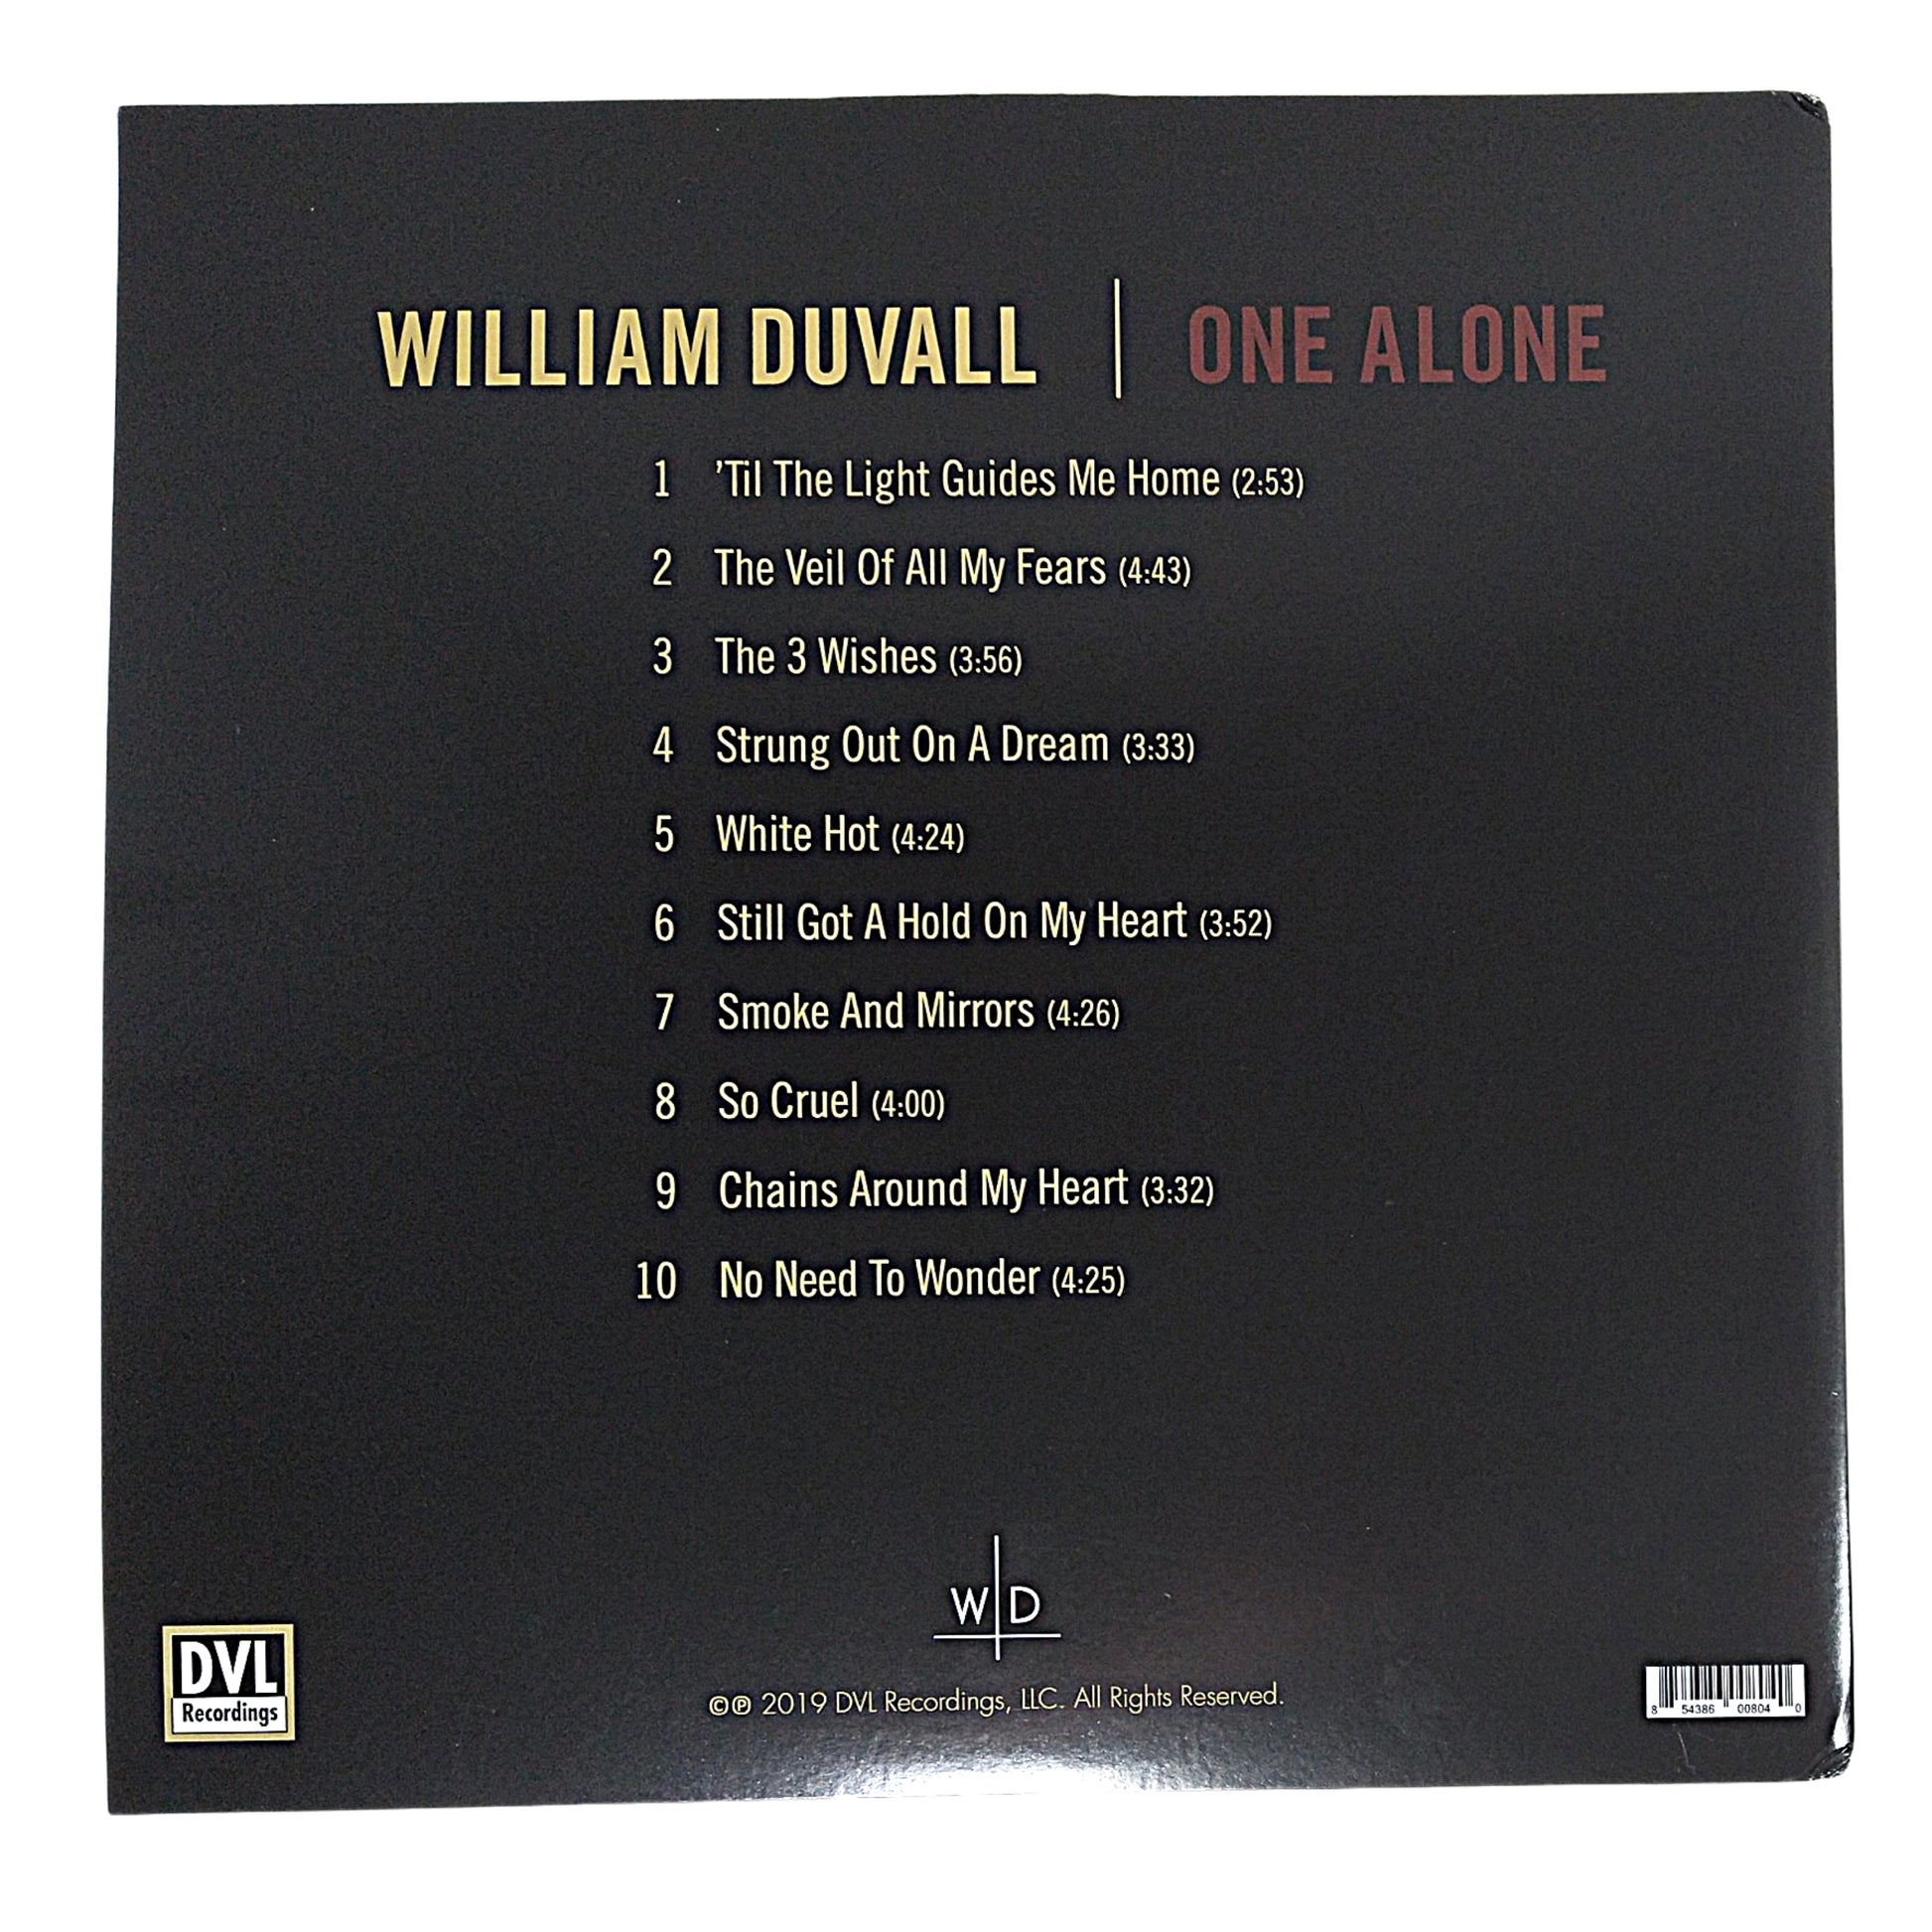 Music- Autographed- William Duvall Signed One Alone Vinyl Record Album Cover Beckett BAS Authentication 106